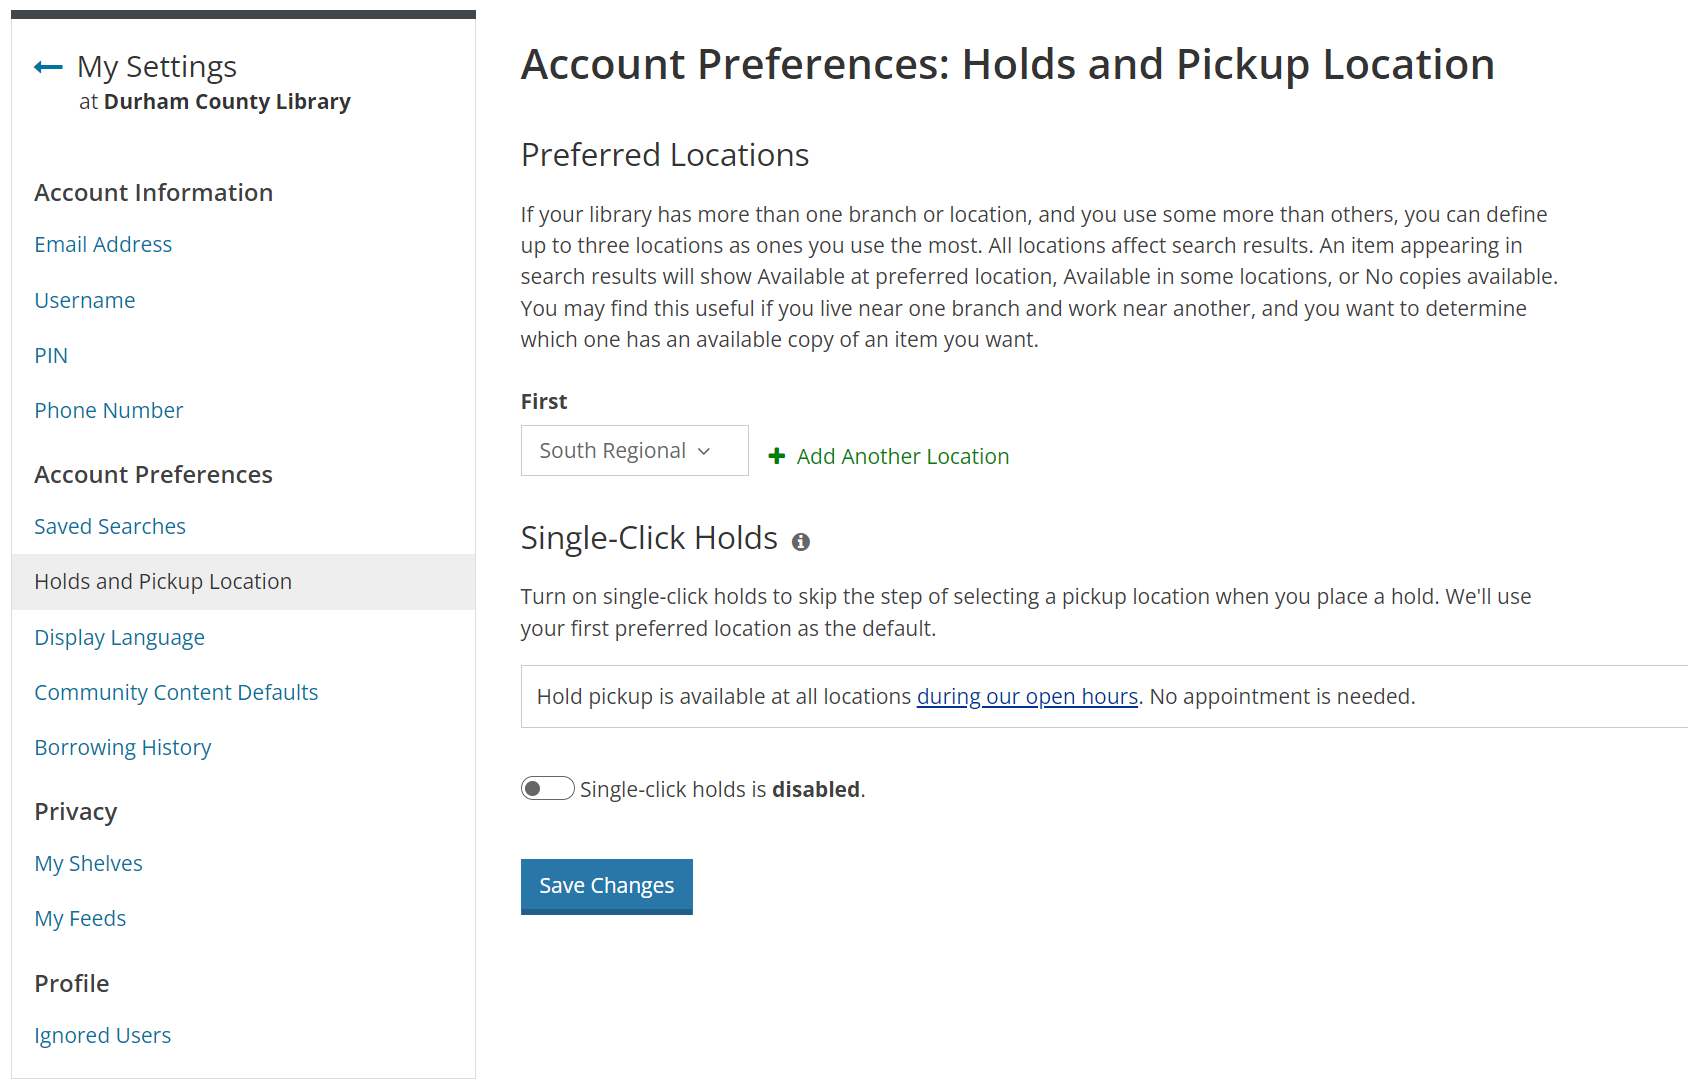 Account Preferences page for Holds and Pickup Location settings, with a section for choosing a preferred location followed by a section for toggling the one-click holds section